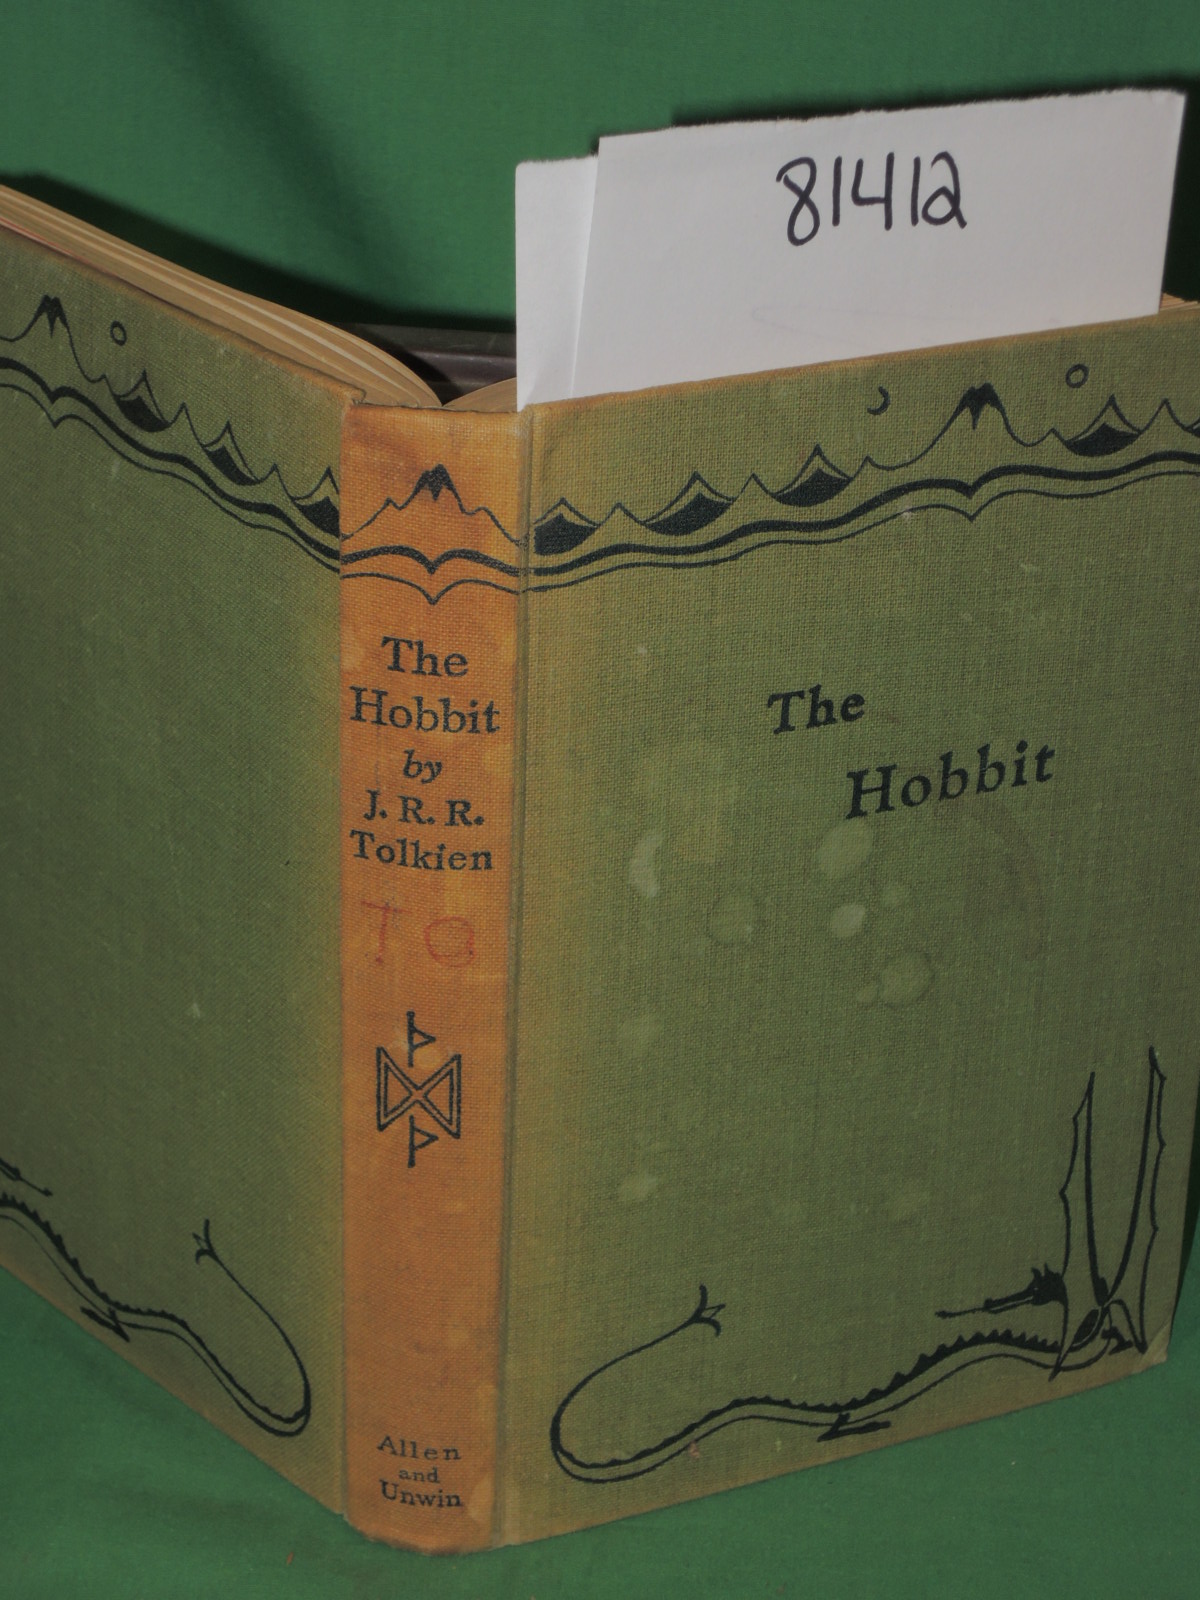 Tolkien,  J.R.R.: THE HOBBIT or There and Back Again 8TH IMPRESSION